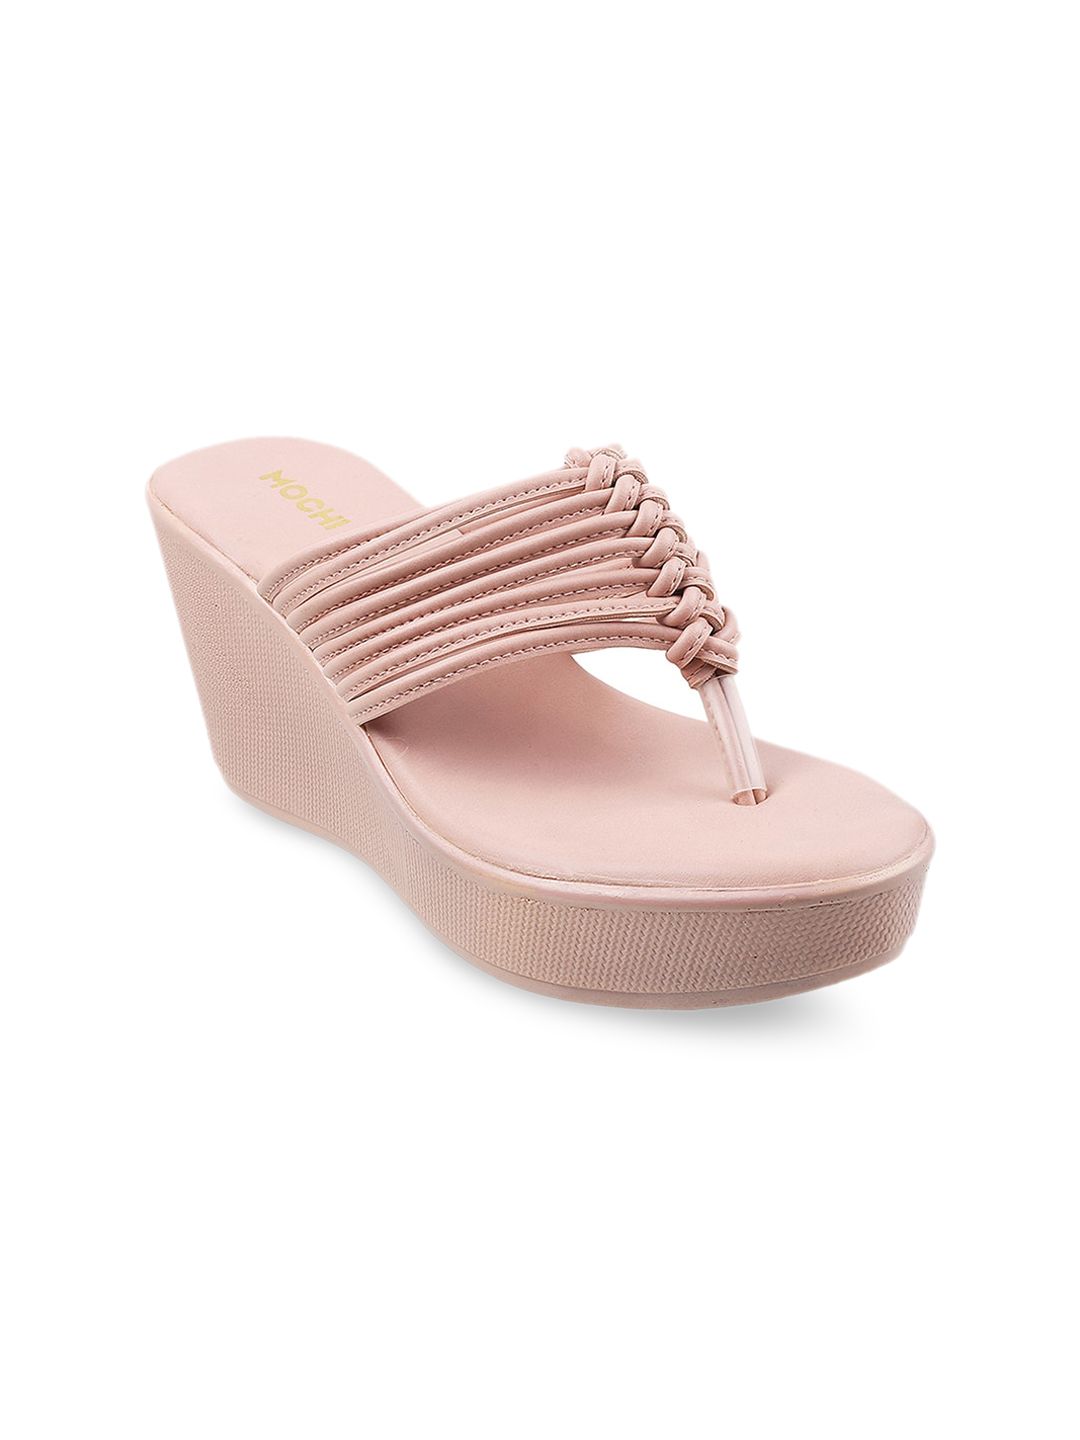 Mochi Pink Wedge Heel Price in India